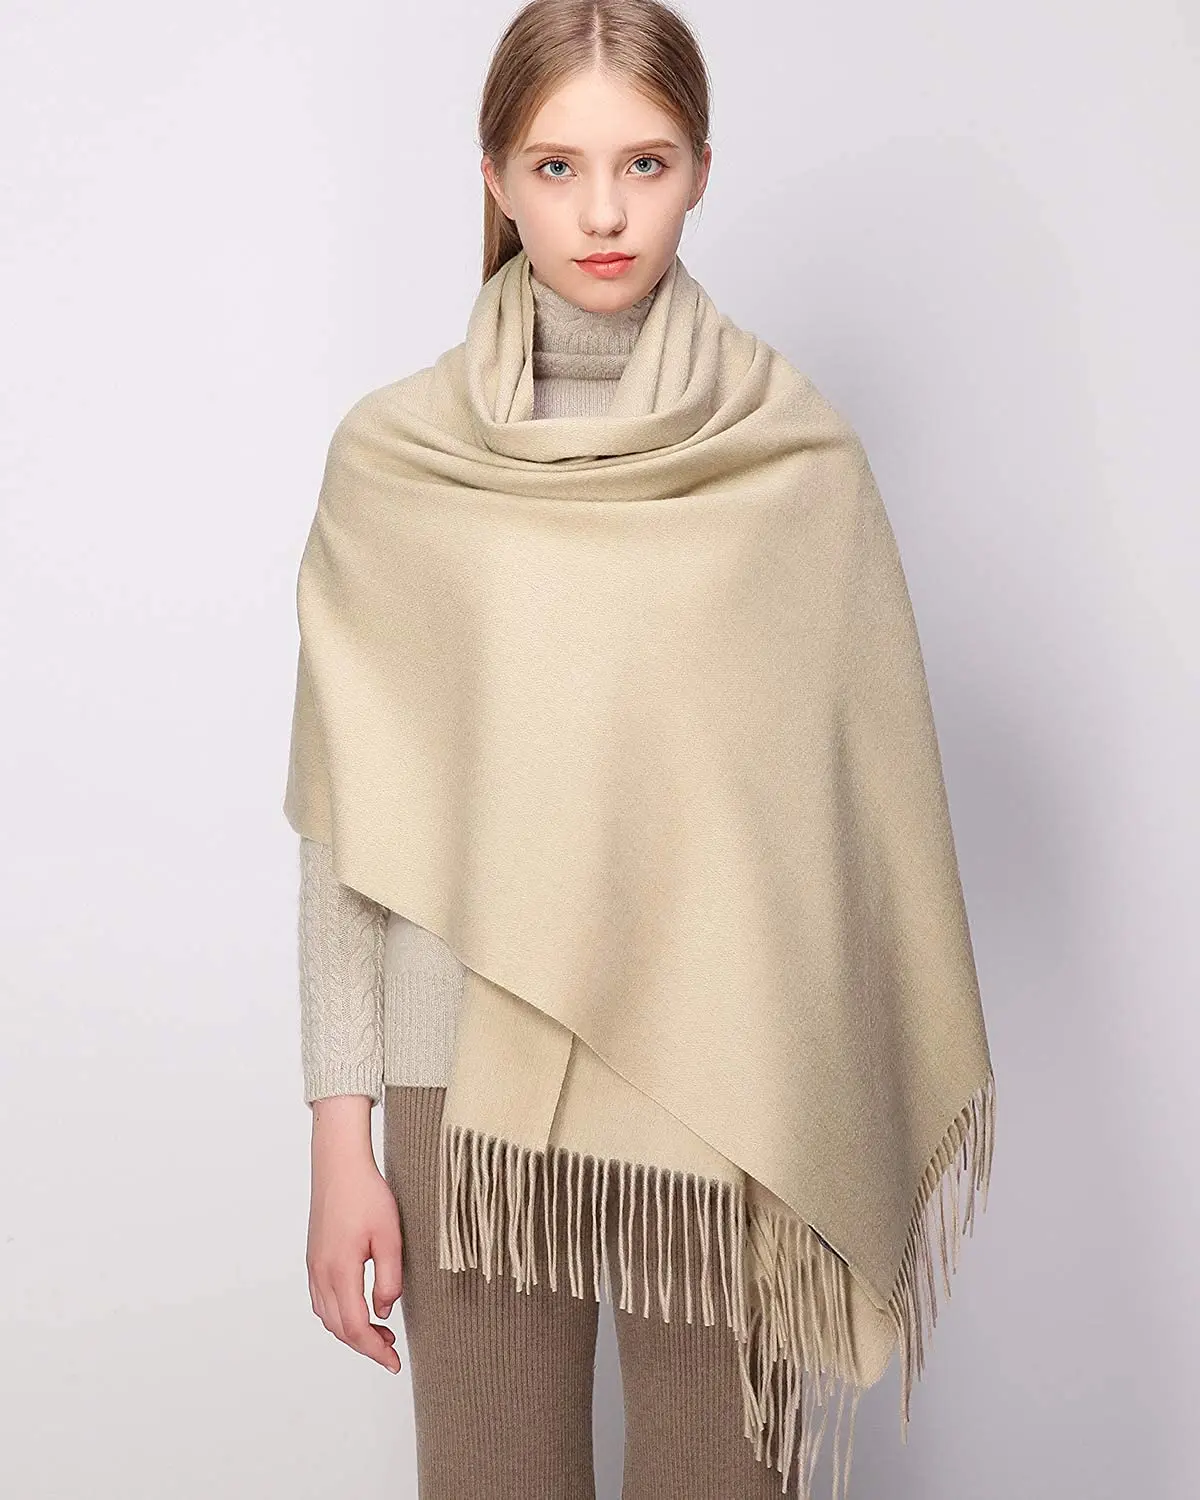 Wholesale Custom Luxury Thick Shawl Knitted Pashmina Cashmere Hijabs Blanket Winter Plain Scarves Ladies Cashmere Scarfs Women